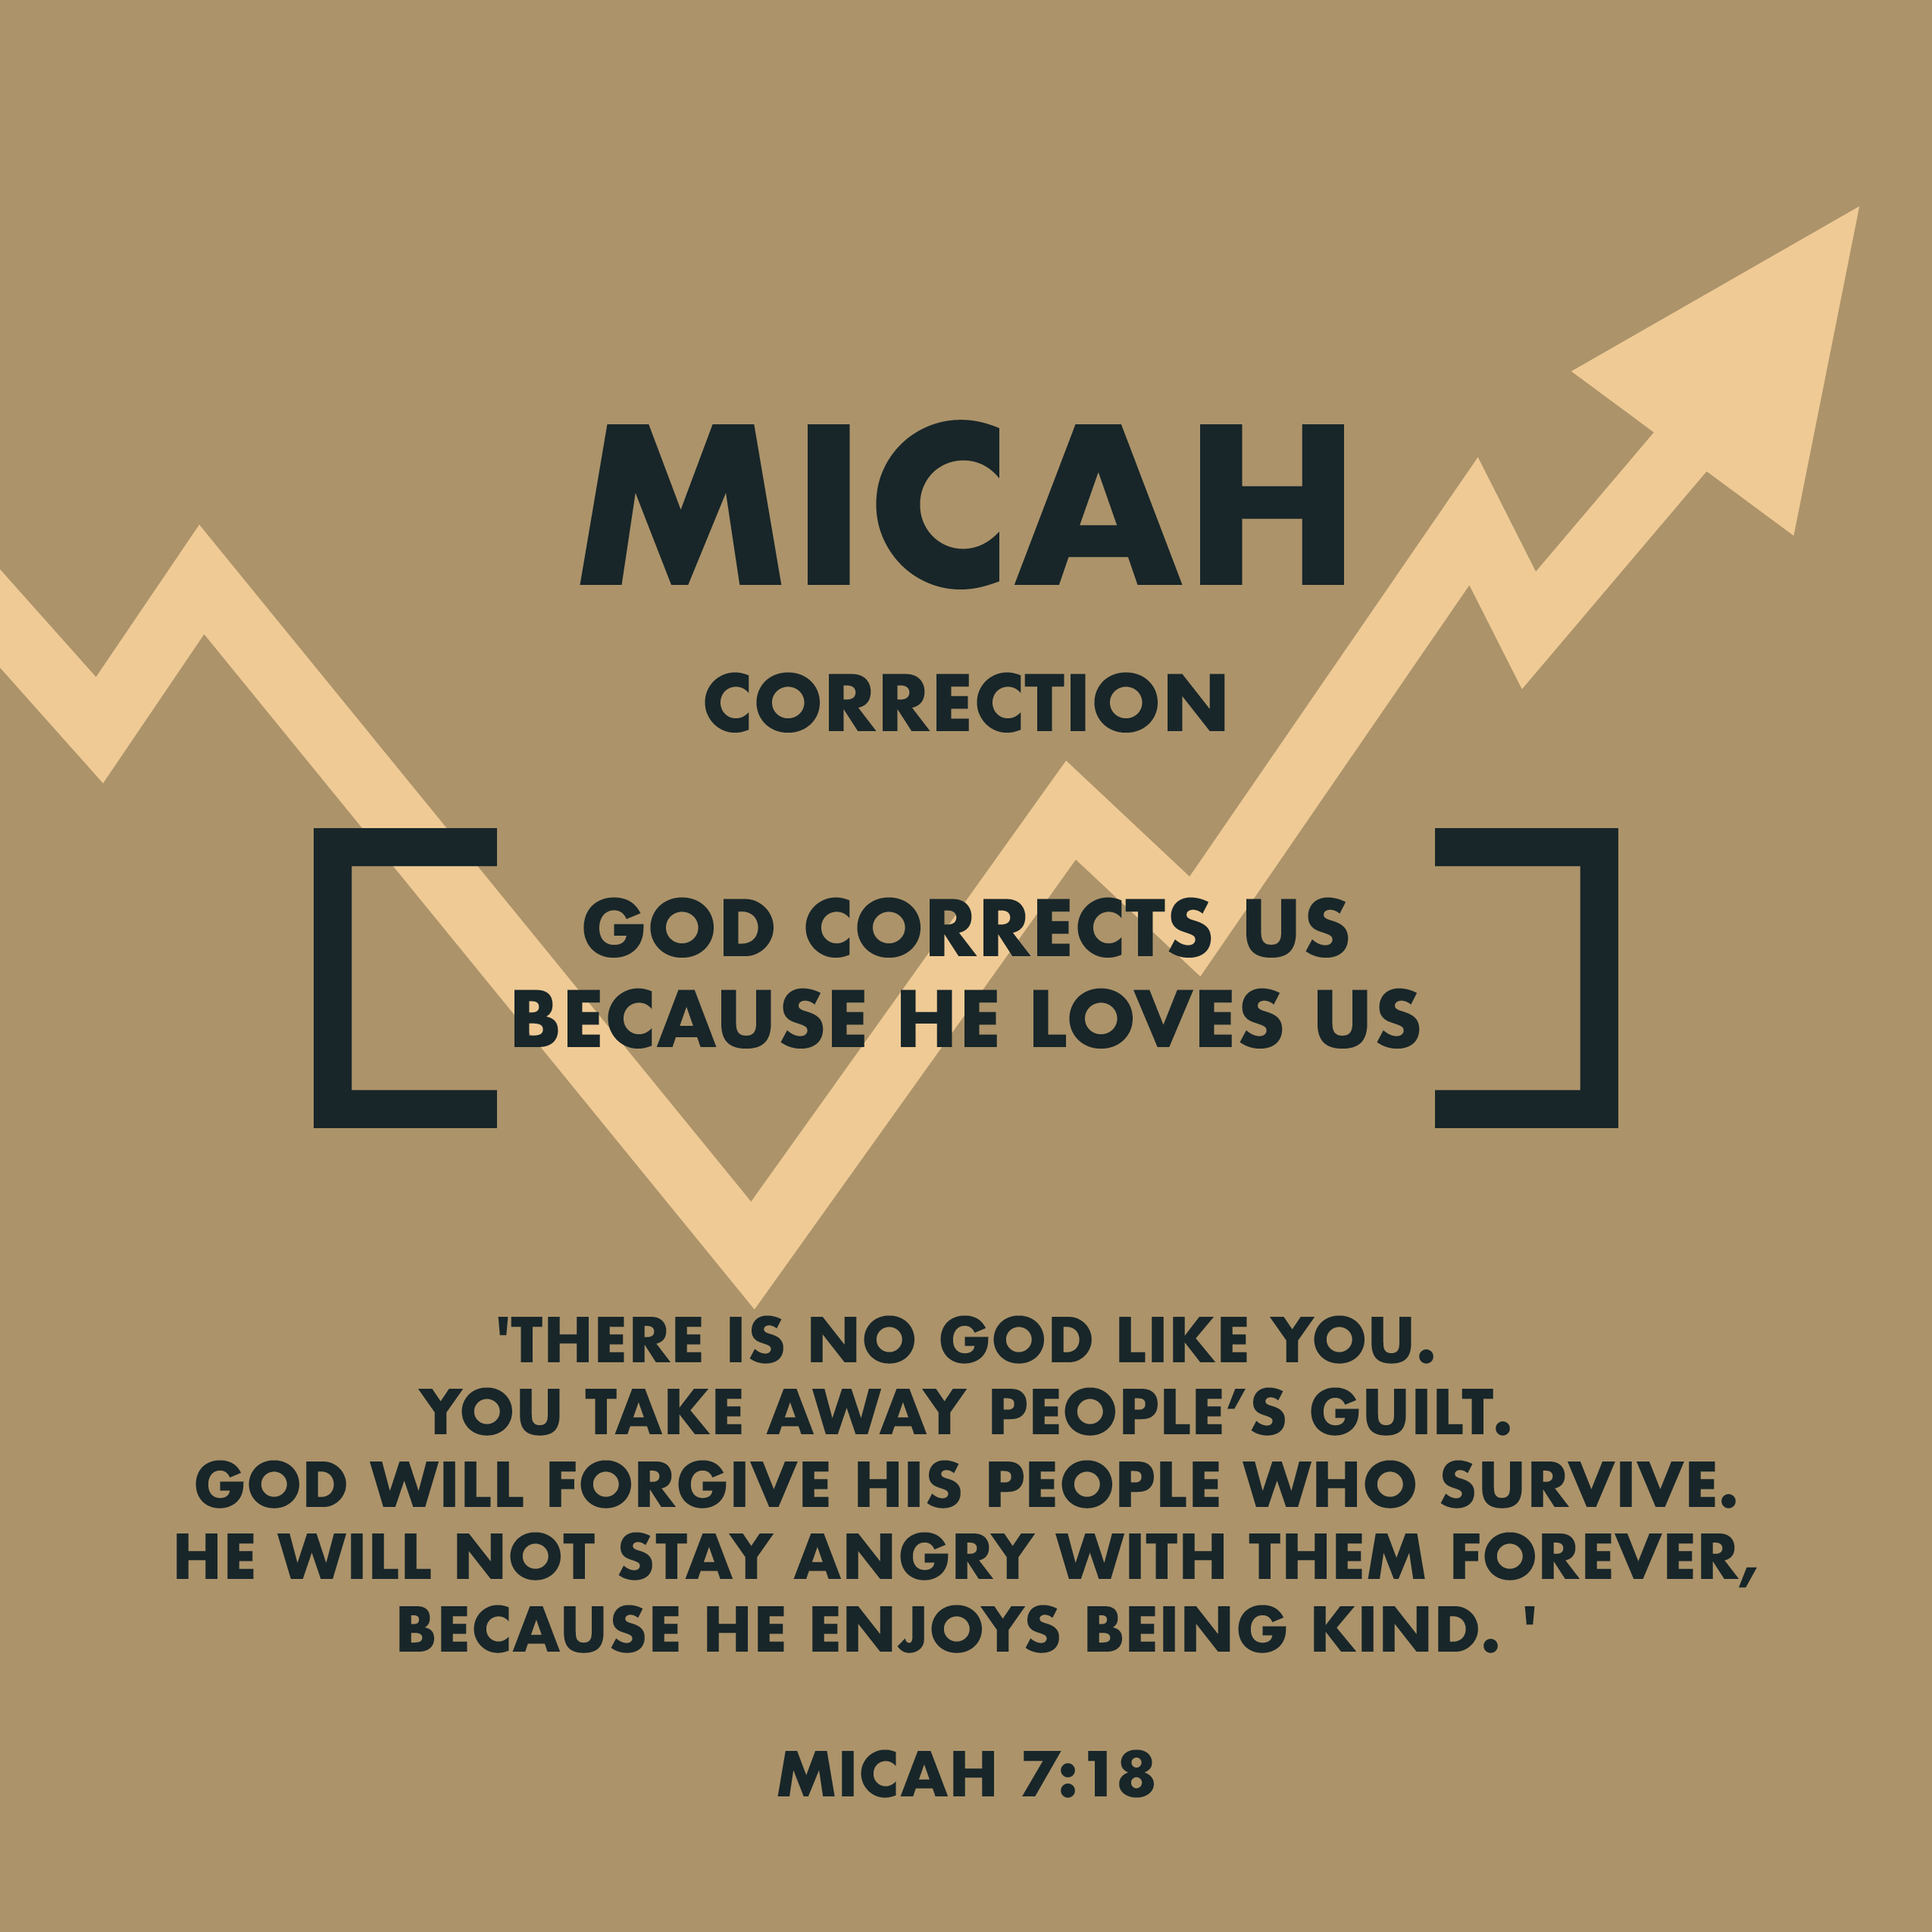 Books of the Bible_posters_31 Micah.png